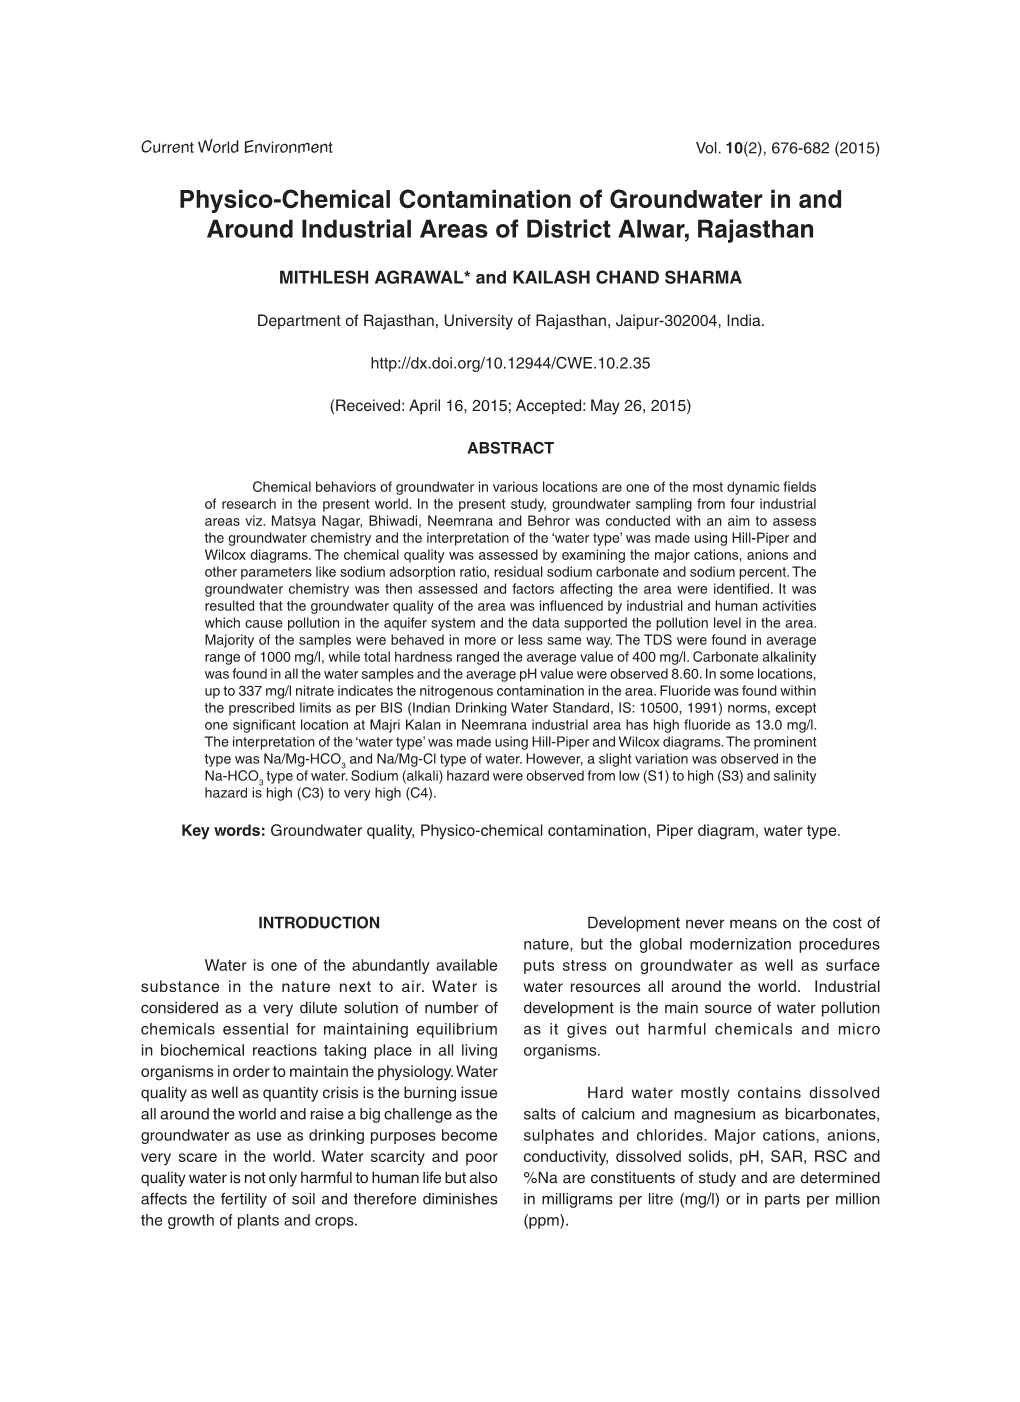 Physico-Chemical Contamination of Groundwater in and Around Industrial Areas of District Alwar, Rajasthan